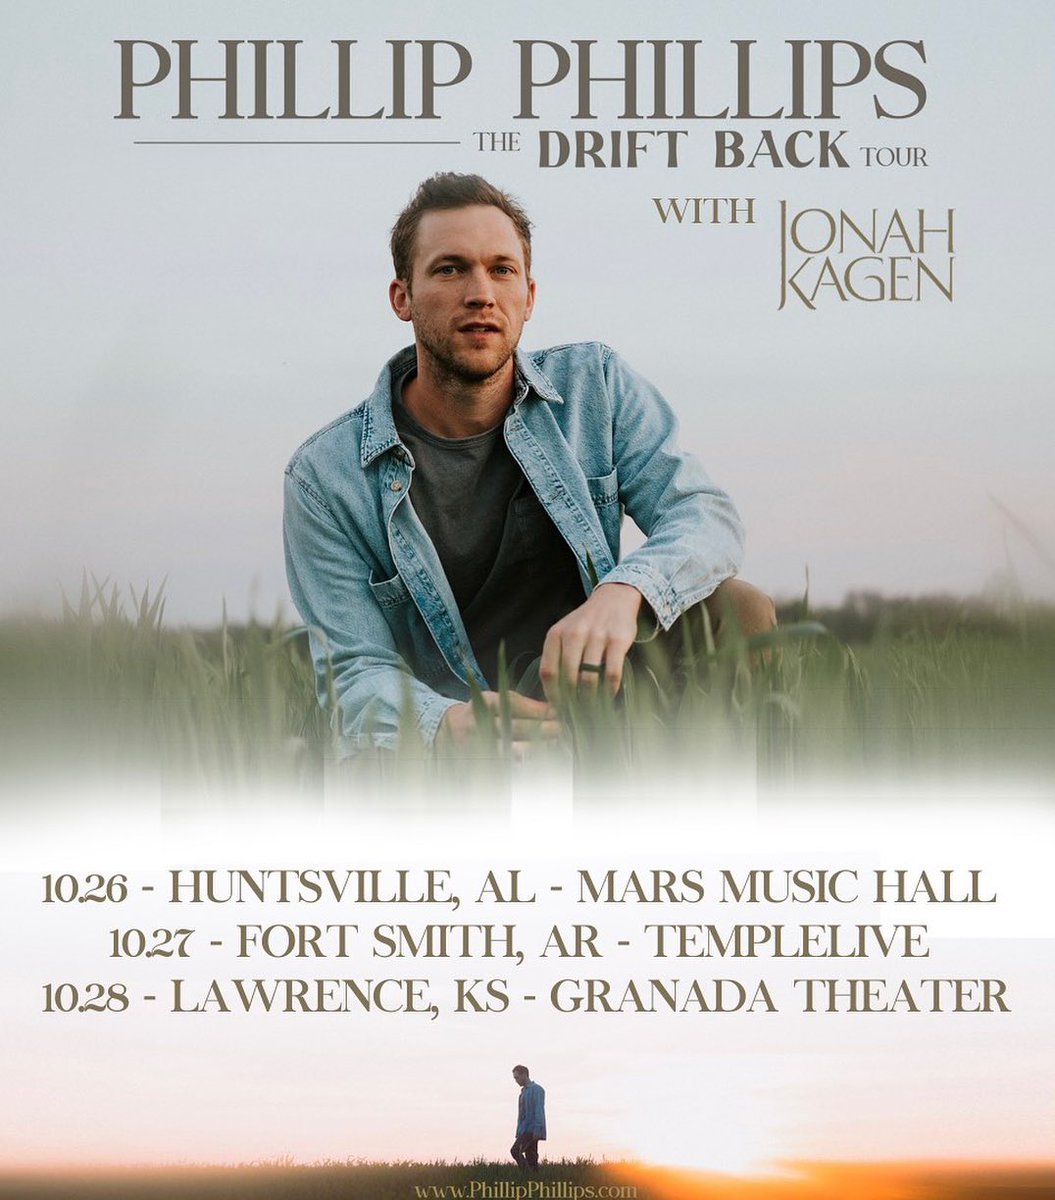 Hard to believe we are halfway through the Drift Back Tour 😦Tomorrow is the start of a few jam-packed weeks in some of my favorite citites - if you haven't grabbed tickets for a show yet, whatcha doing?! Tickets 🎫: phillipphillips.com/tour